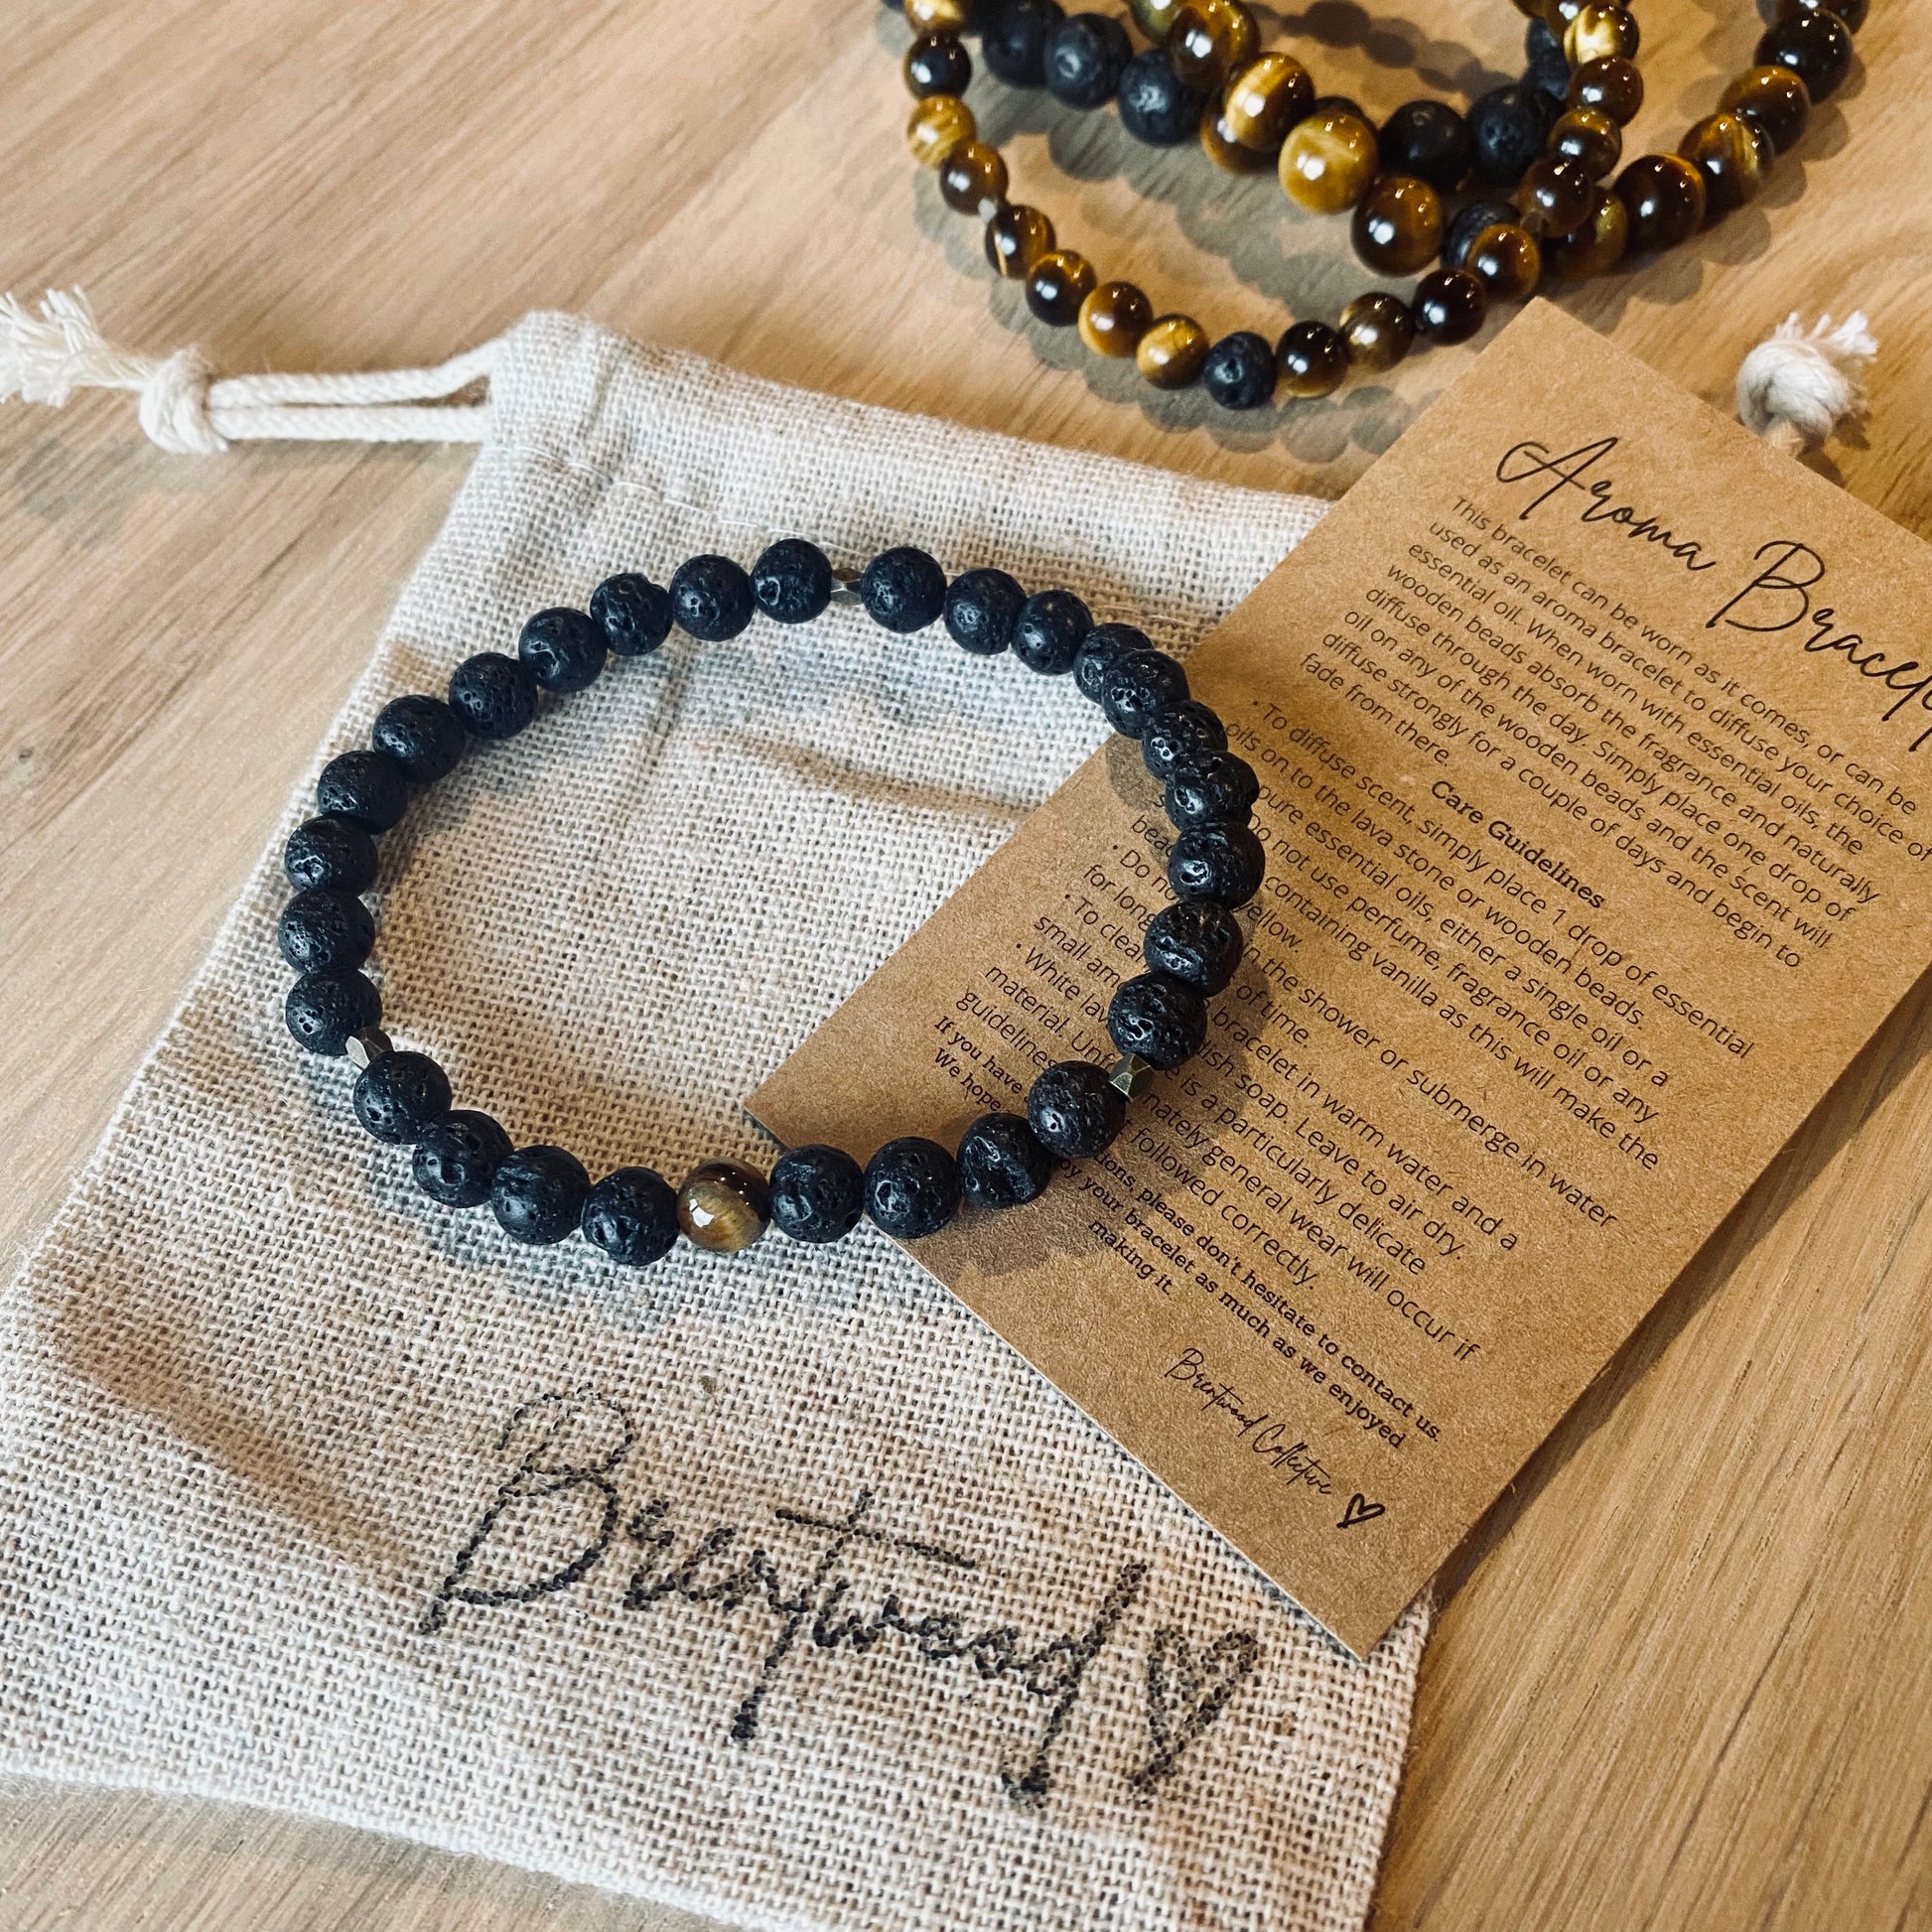 Lava 6 aroma bracelet/diffuser bracelet made from 6mm black lava stone & a single tiger eye bead with antiqued gold faceted embellishments. Laid on cloth pouch/drawstring bag stamped with “Brentwood” and an aroma bracelet information and care card on kraft brown card.